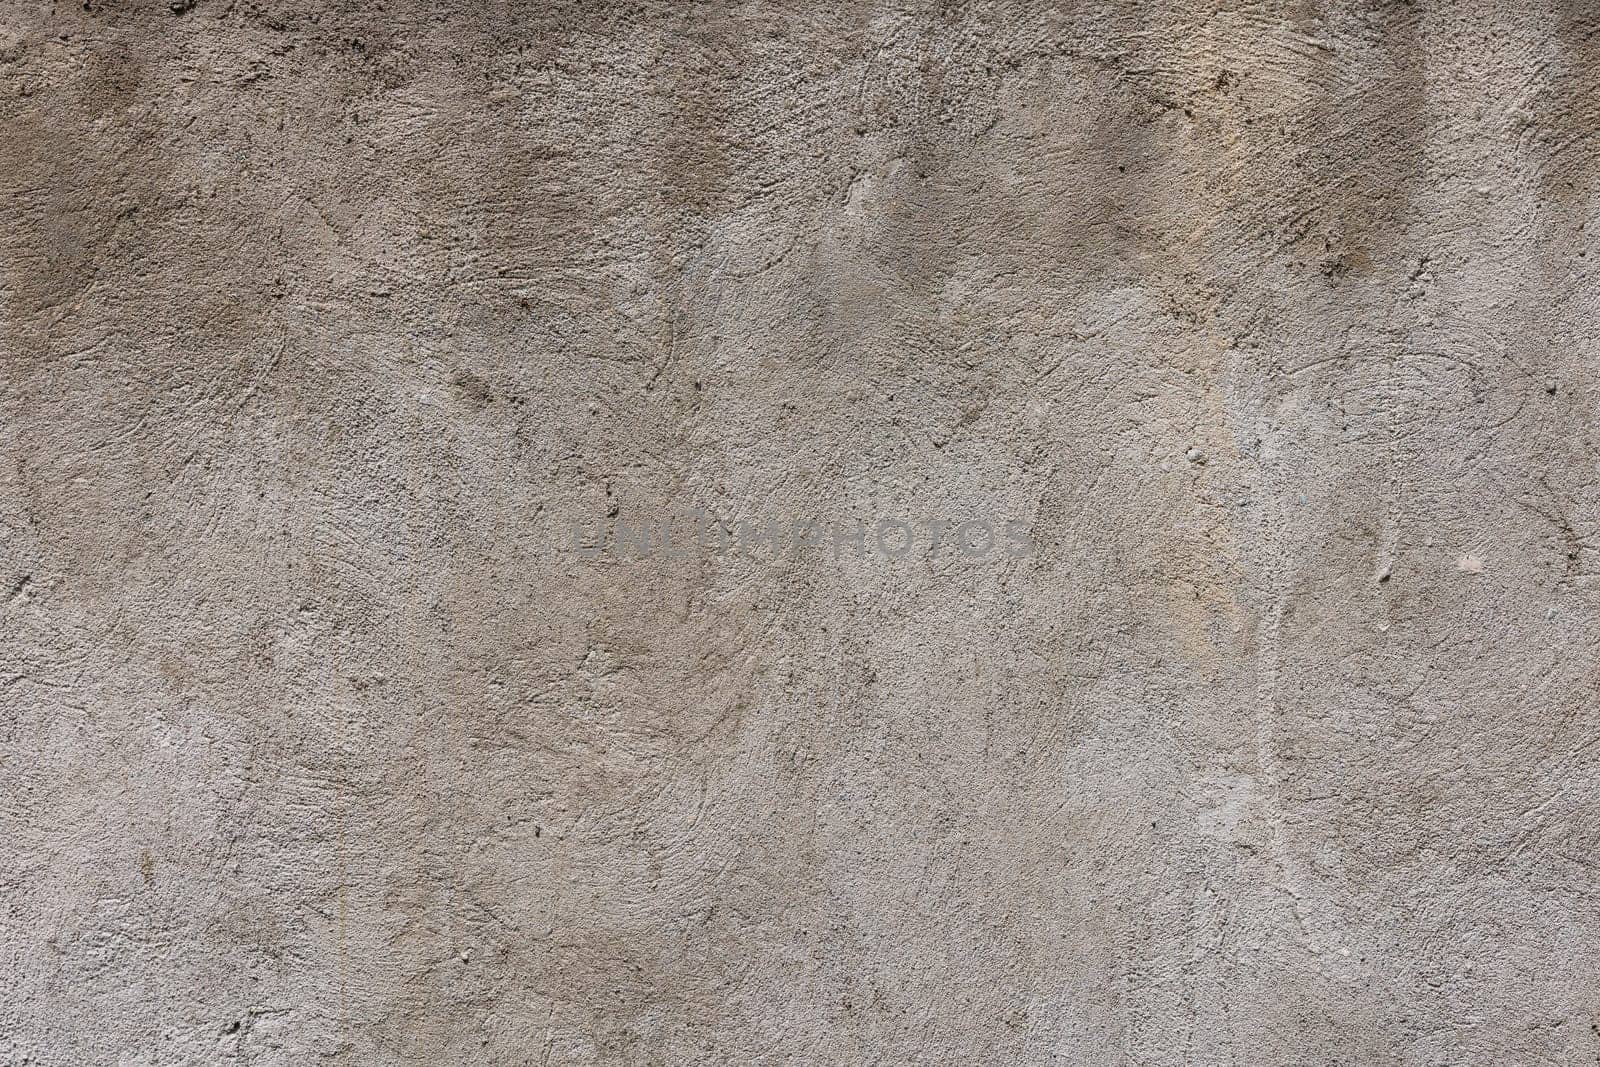 closeup full-frame flat background and texture of solid smeared concrete surface by z1b